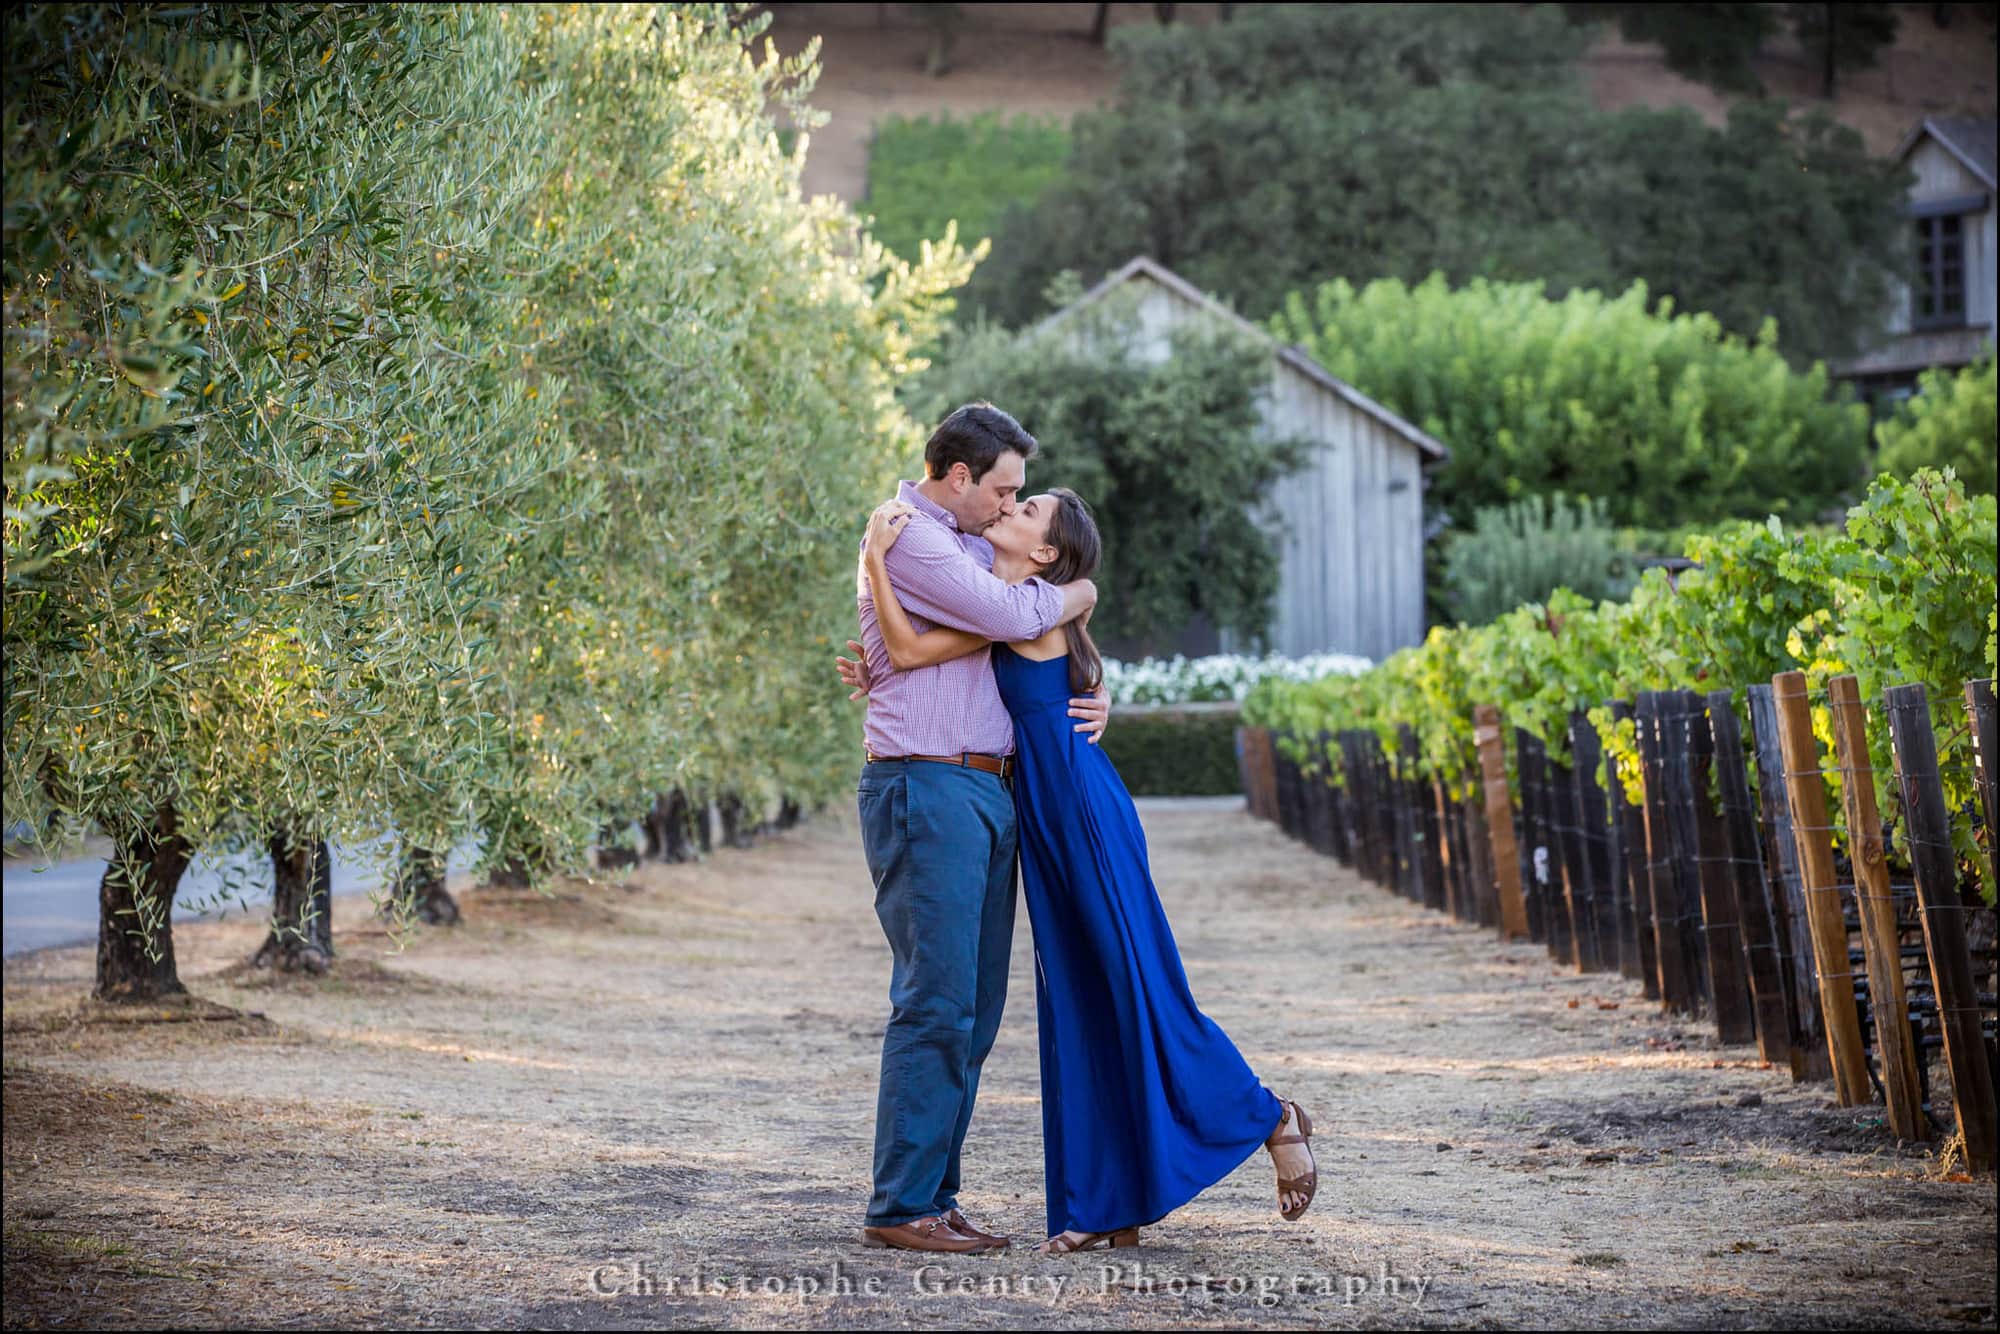 Marriage Proposal Photography at Meadowood Napa Valley